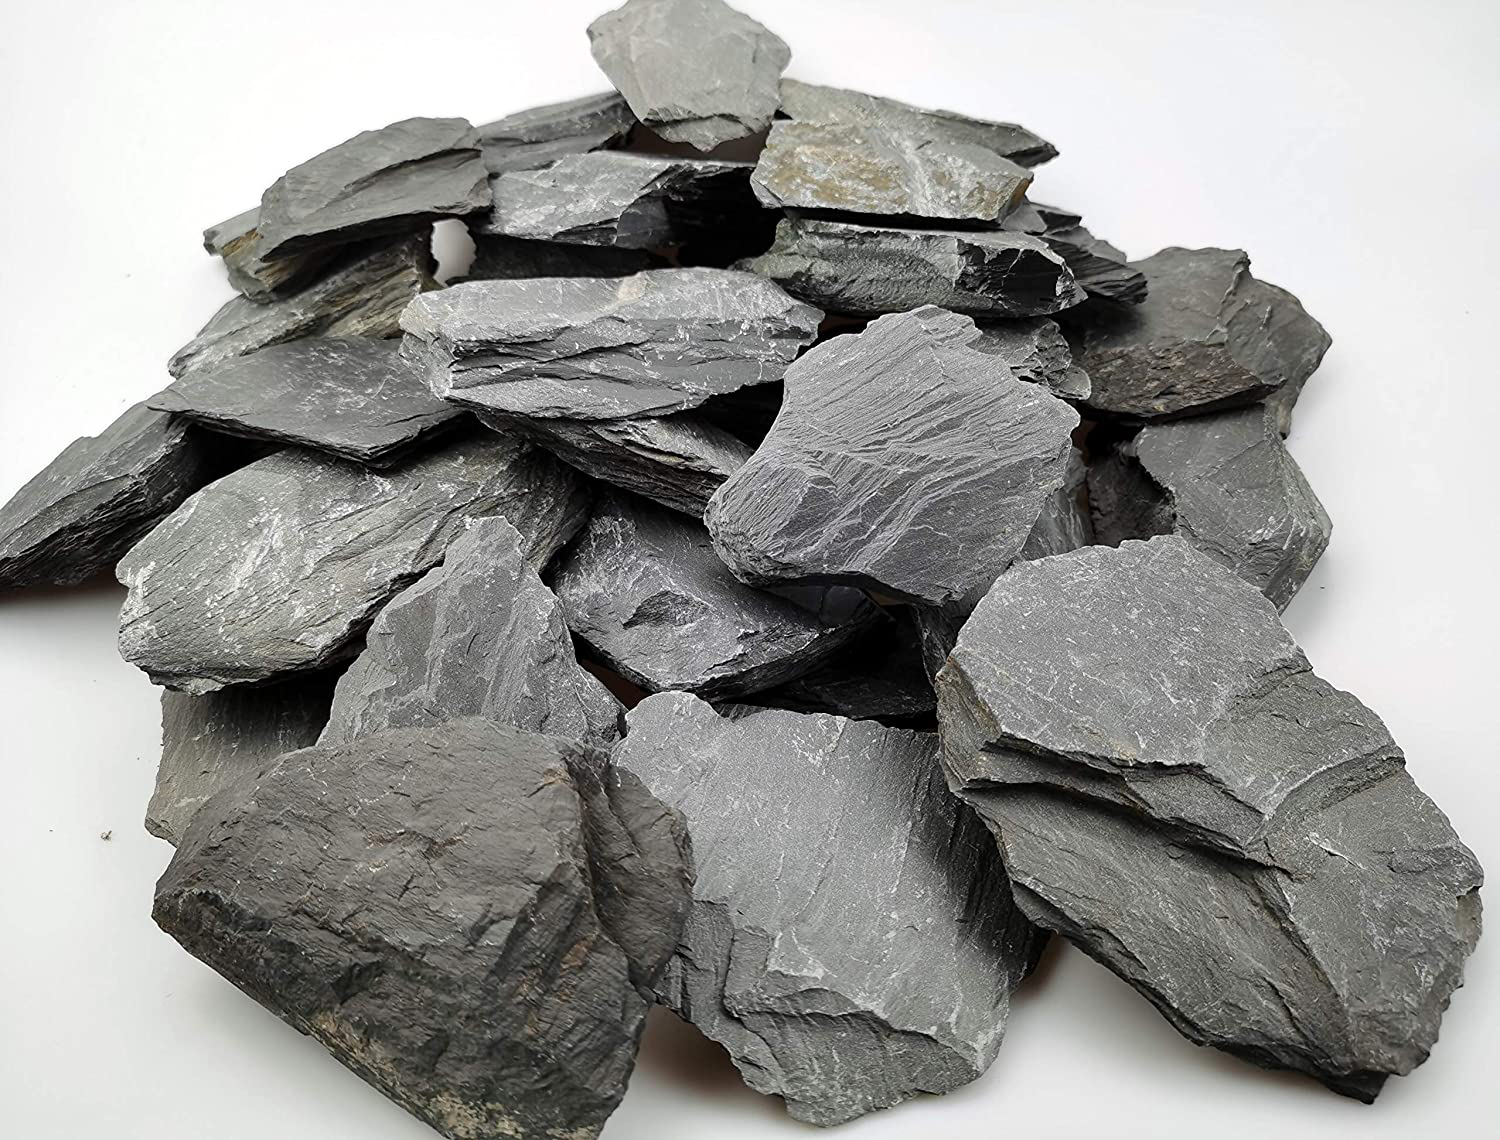 Voulosimi Natural Slate Rocks Stone Perfect Rocks Seiryu Rock for Aquariums, Landscaping Model,Amphibian Enclosures Animals & Pet Supplies > Pet Supplies > Fish Supplies > Aquarium Decor Voulosimi 3.5 Pound Slate 1-3in  